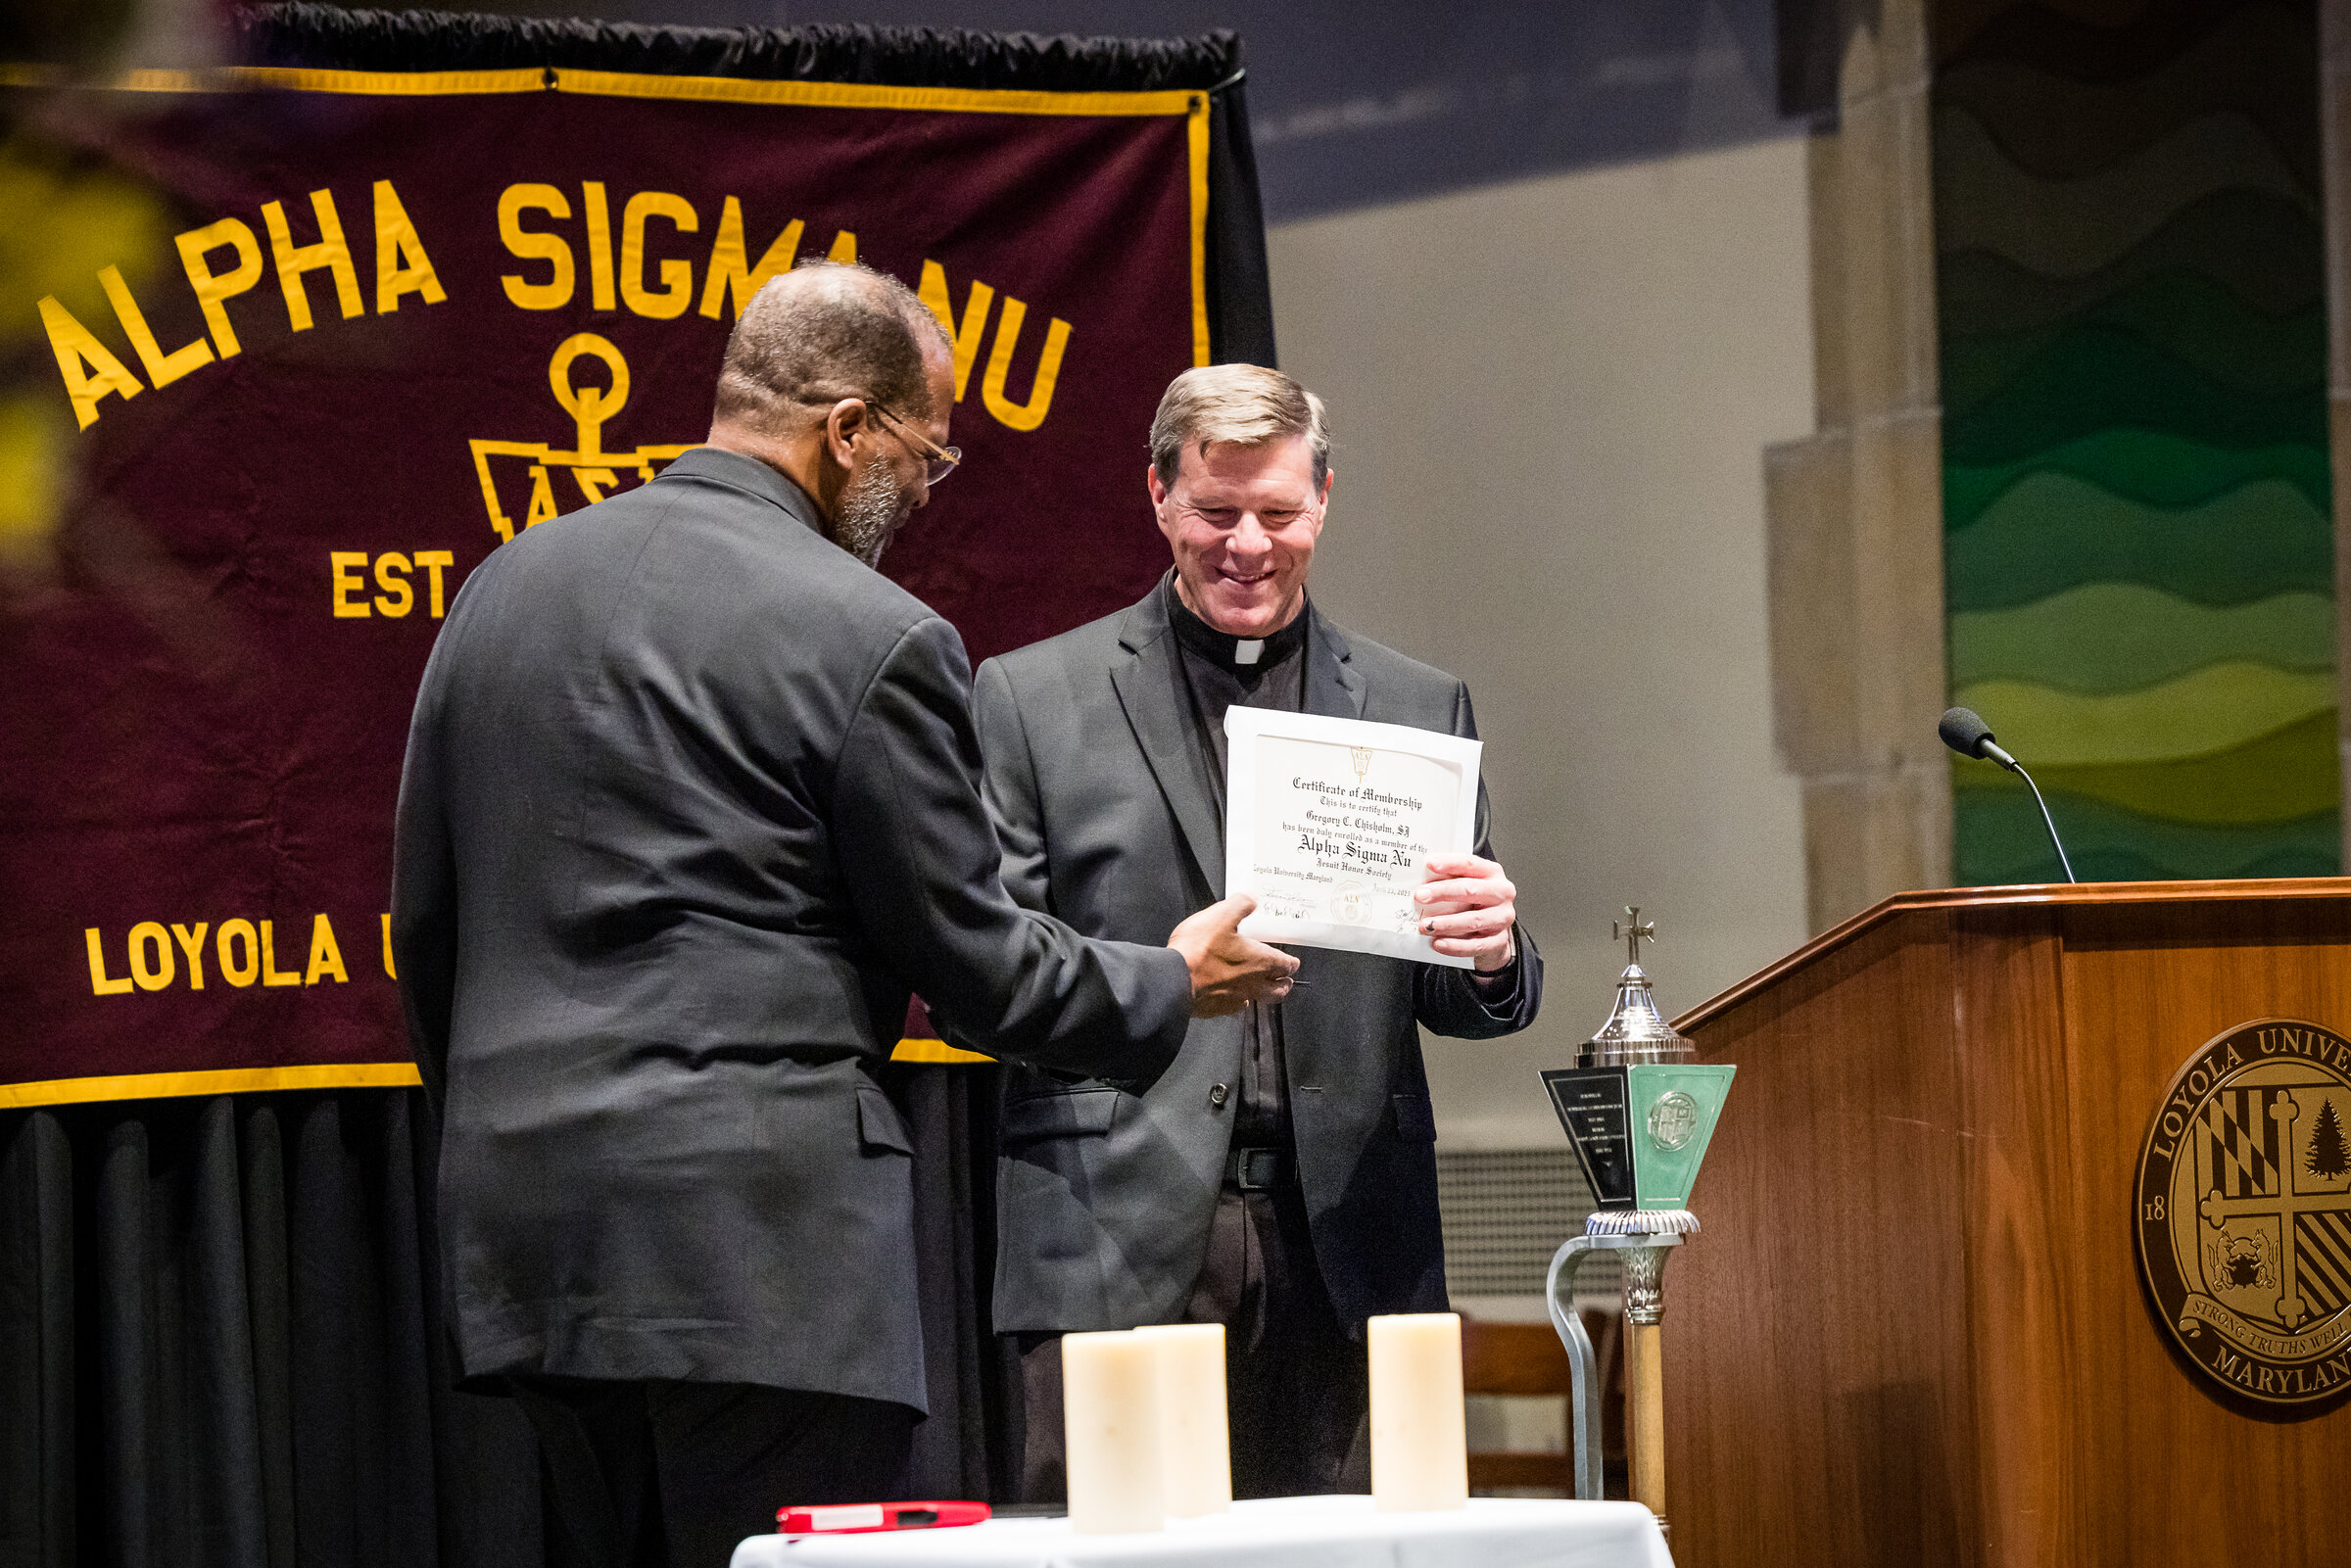 Two faculty members holding up an Alpha Sigma Nu Certificate